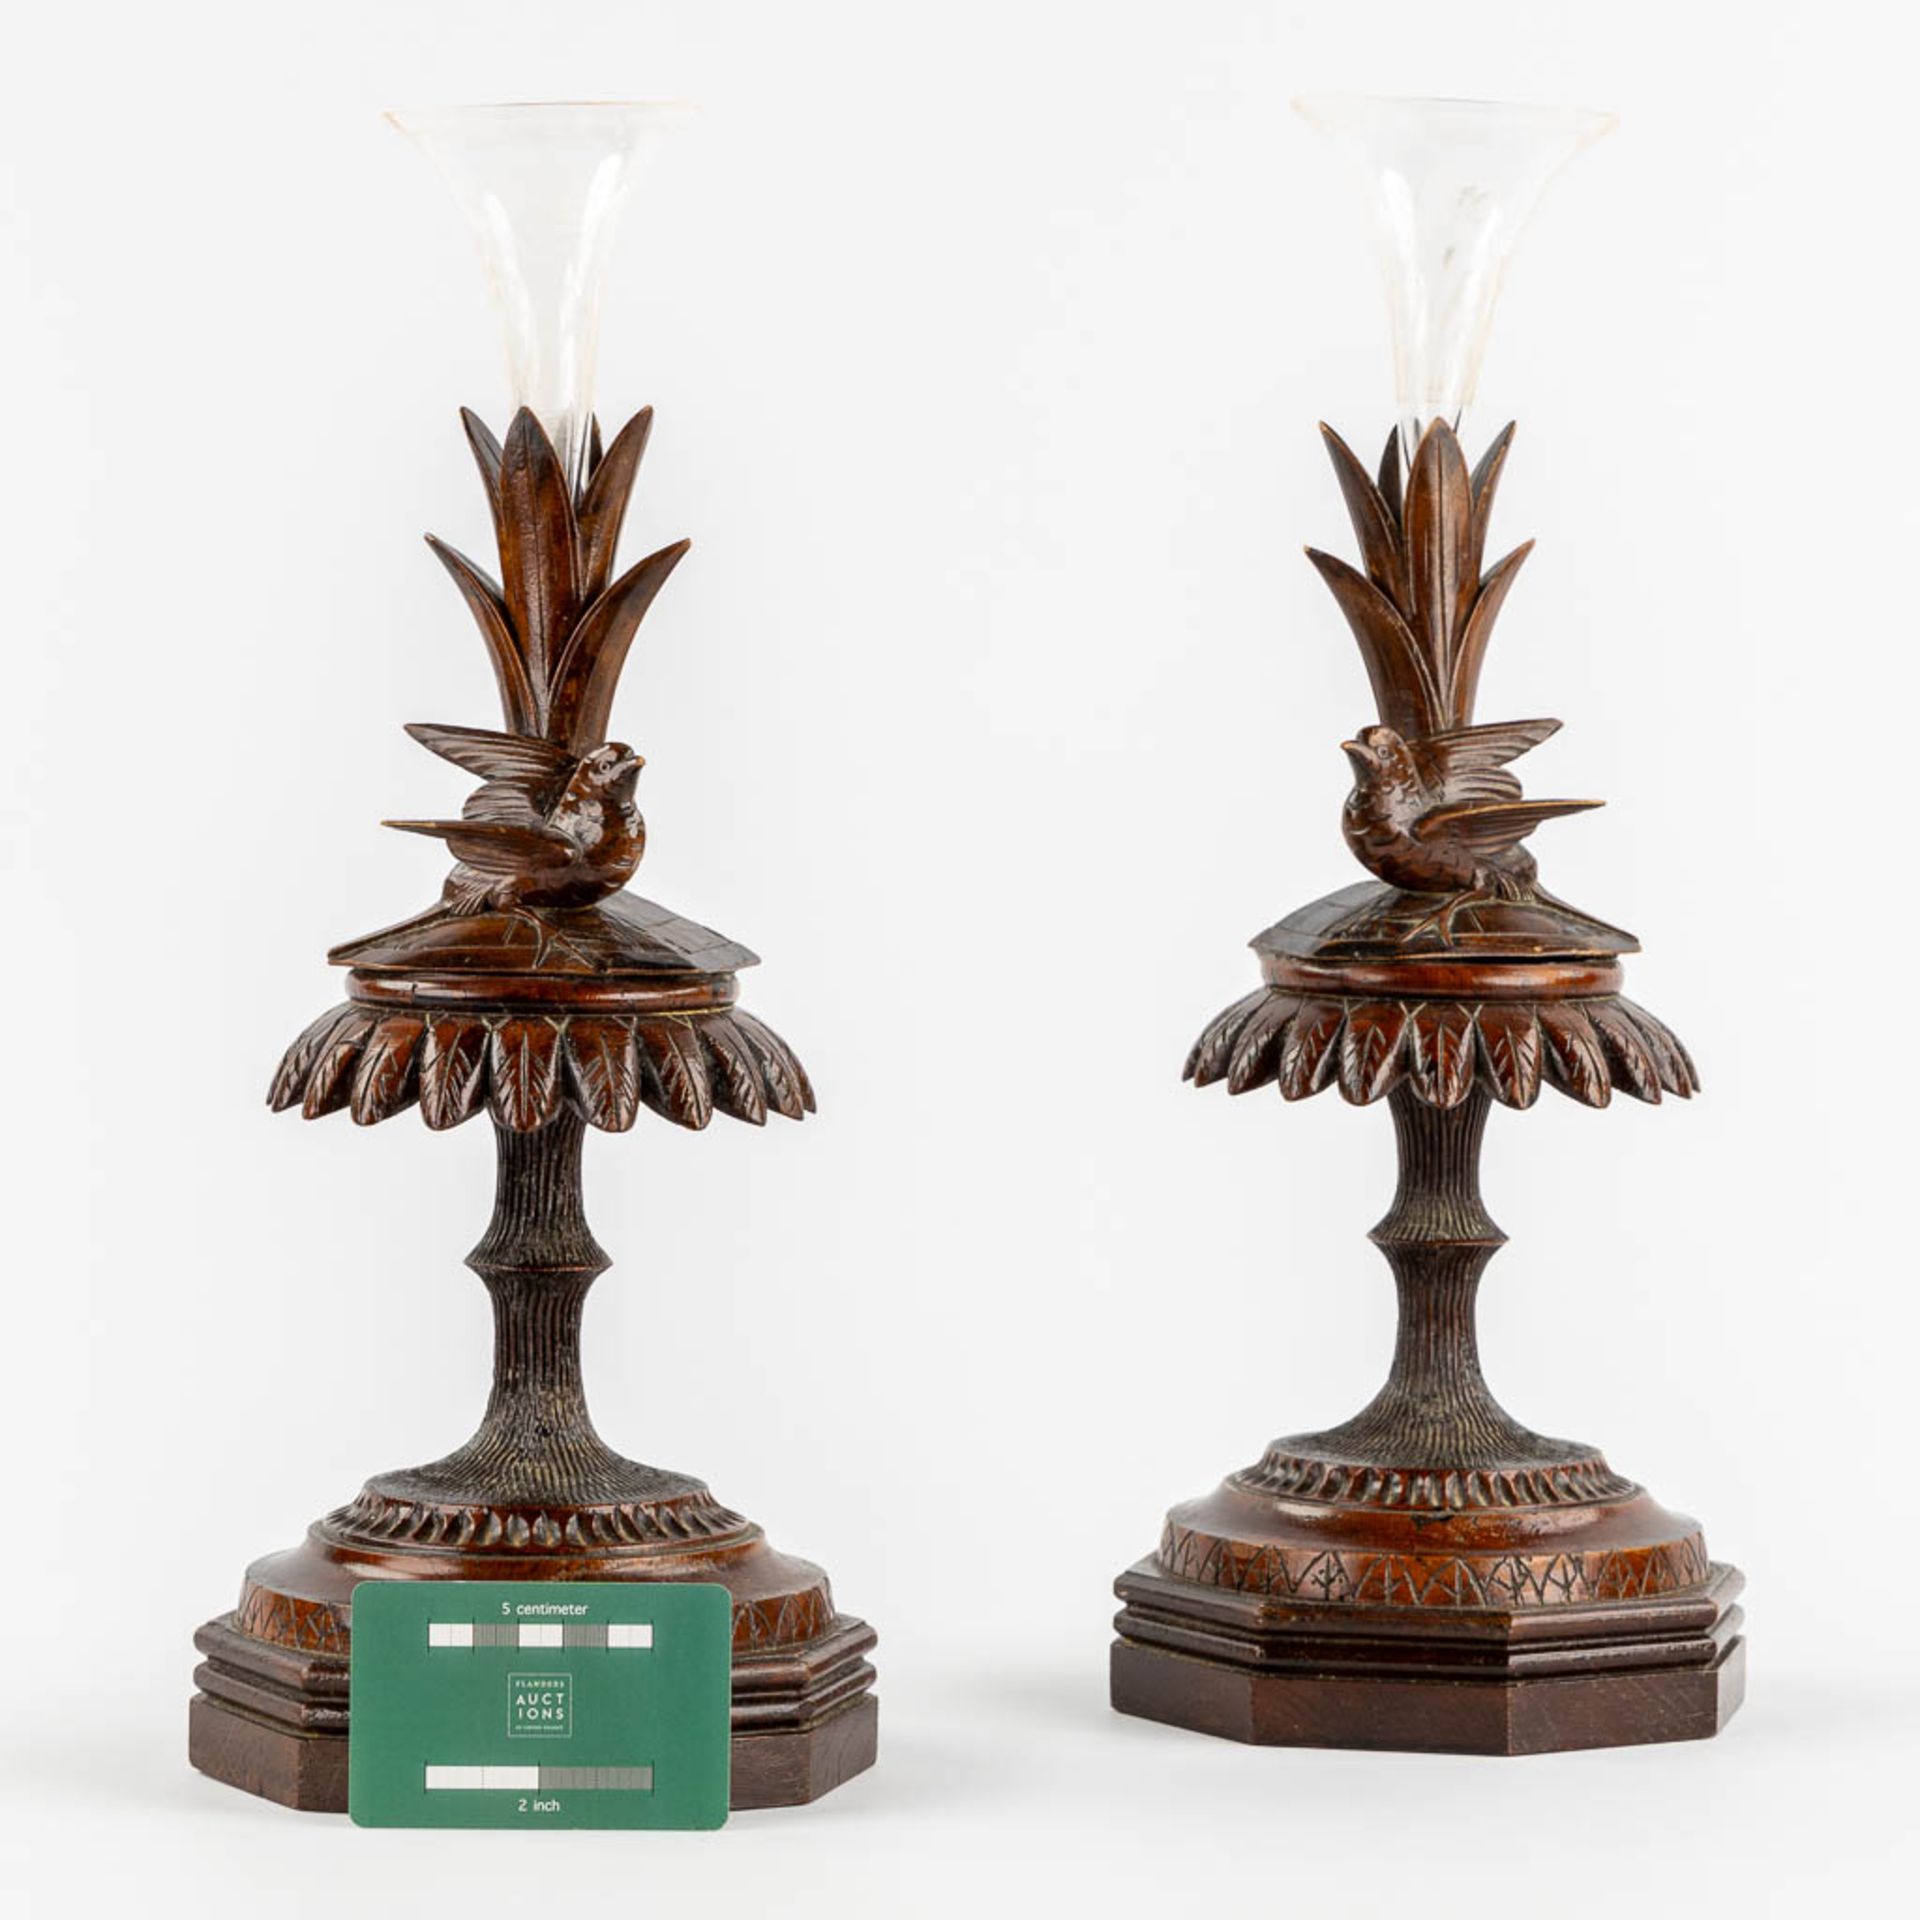 Two bases for Trumpet Vases, Schwartzwald or Black Forest. Circa 1880. (L:14,5 x W:14,5 x H:40 cm) - Image 2 of 11